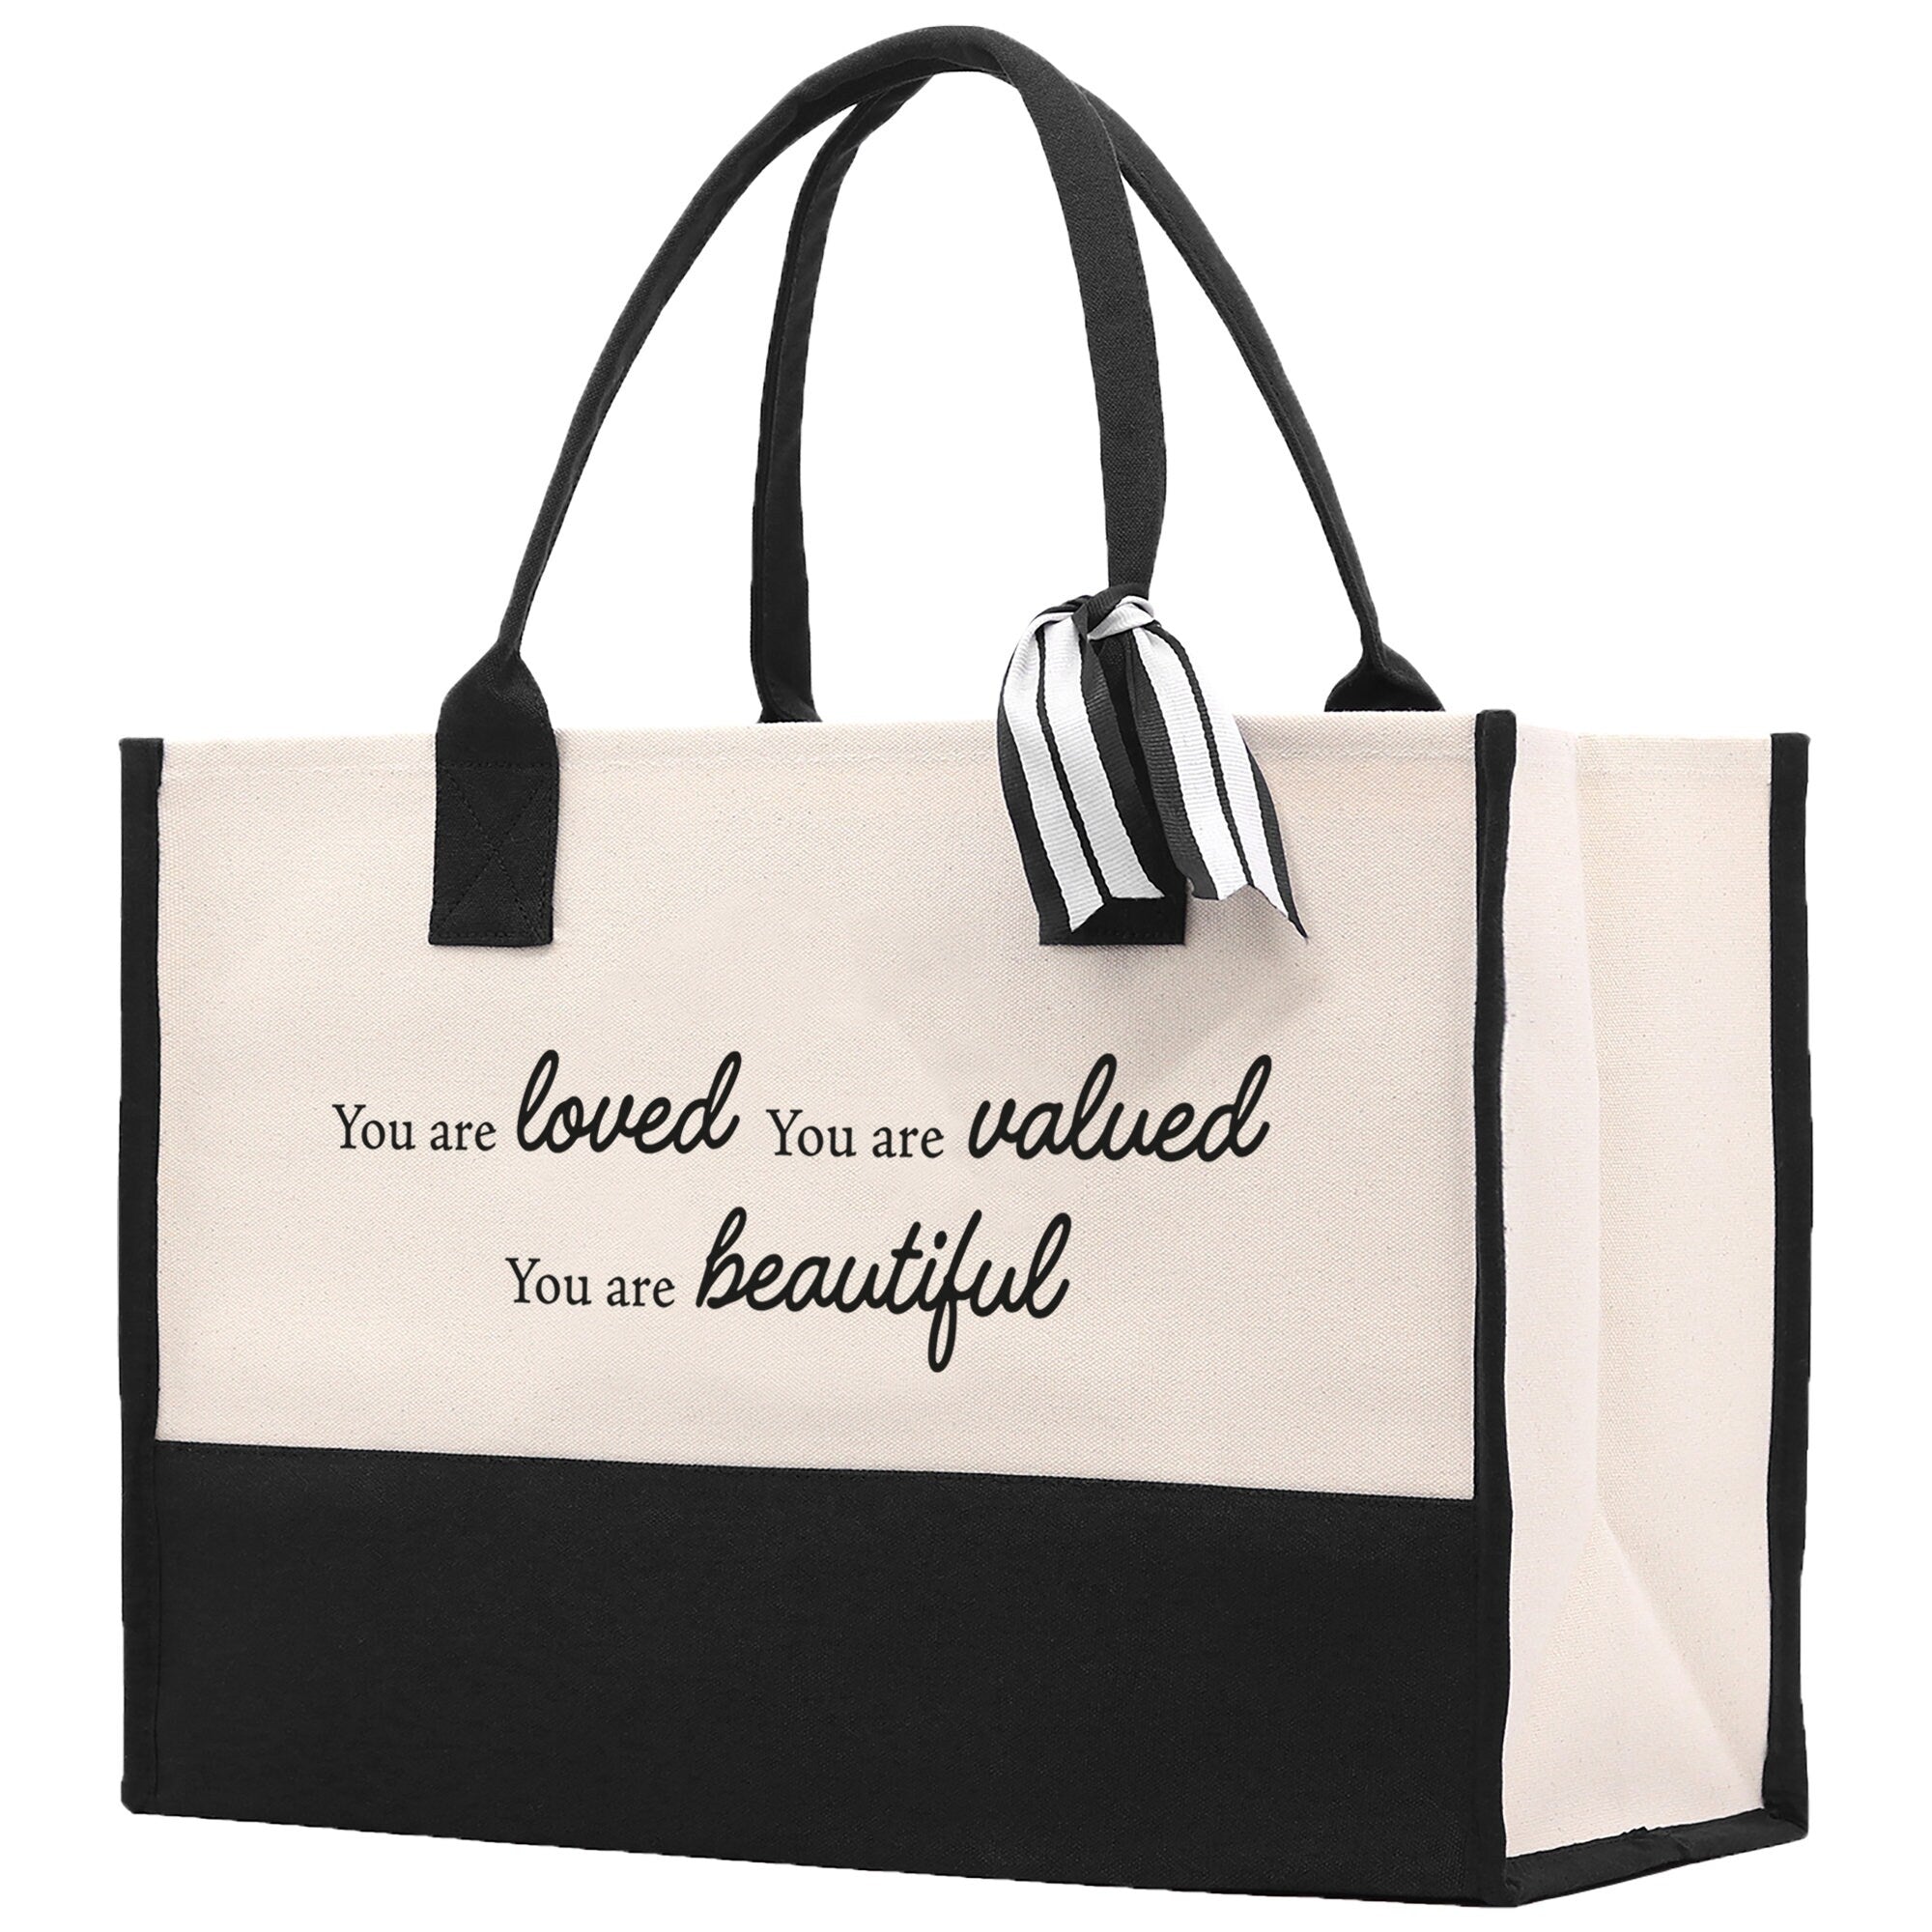 You Are Loved You Are Valued You Are Beautiful Canvas Tote Bag Birthday Gift for Her Weekender Tote Bag Beach Tote Bag Large Beach Tote Bag